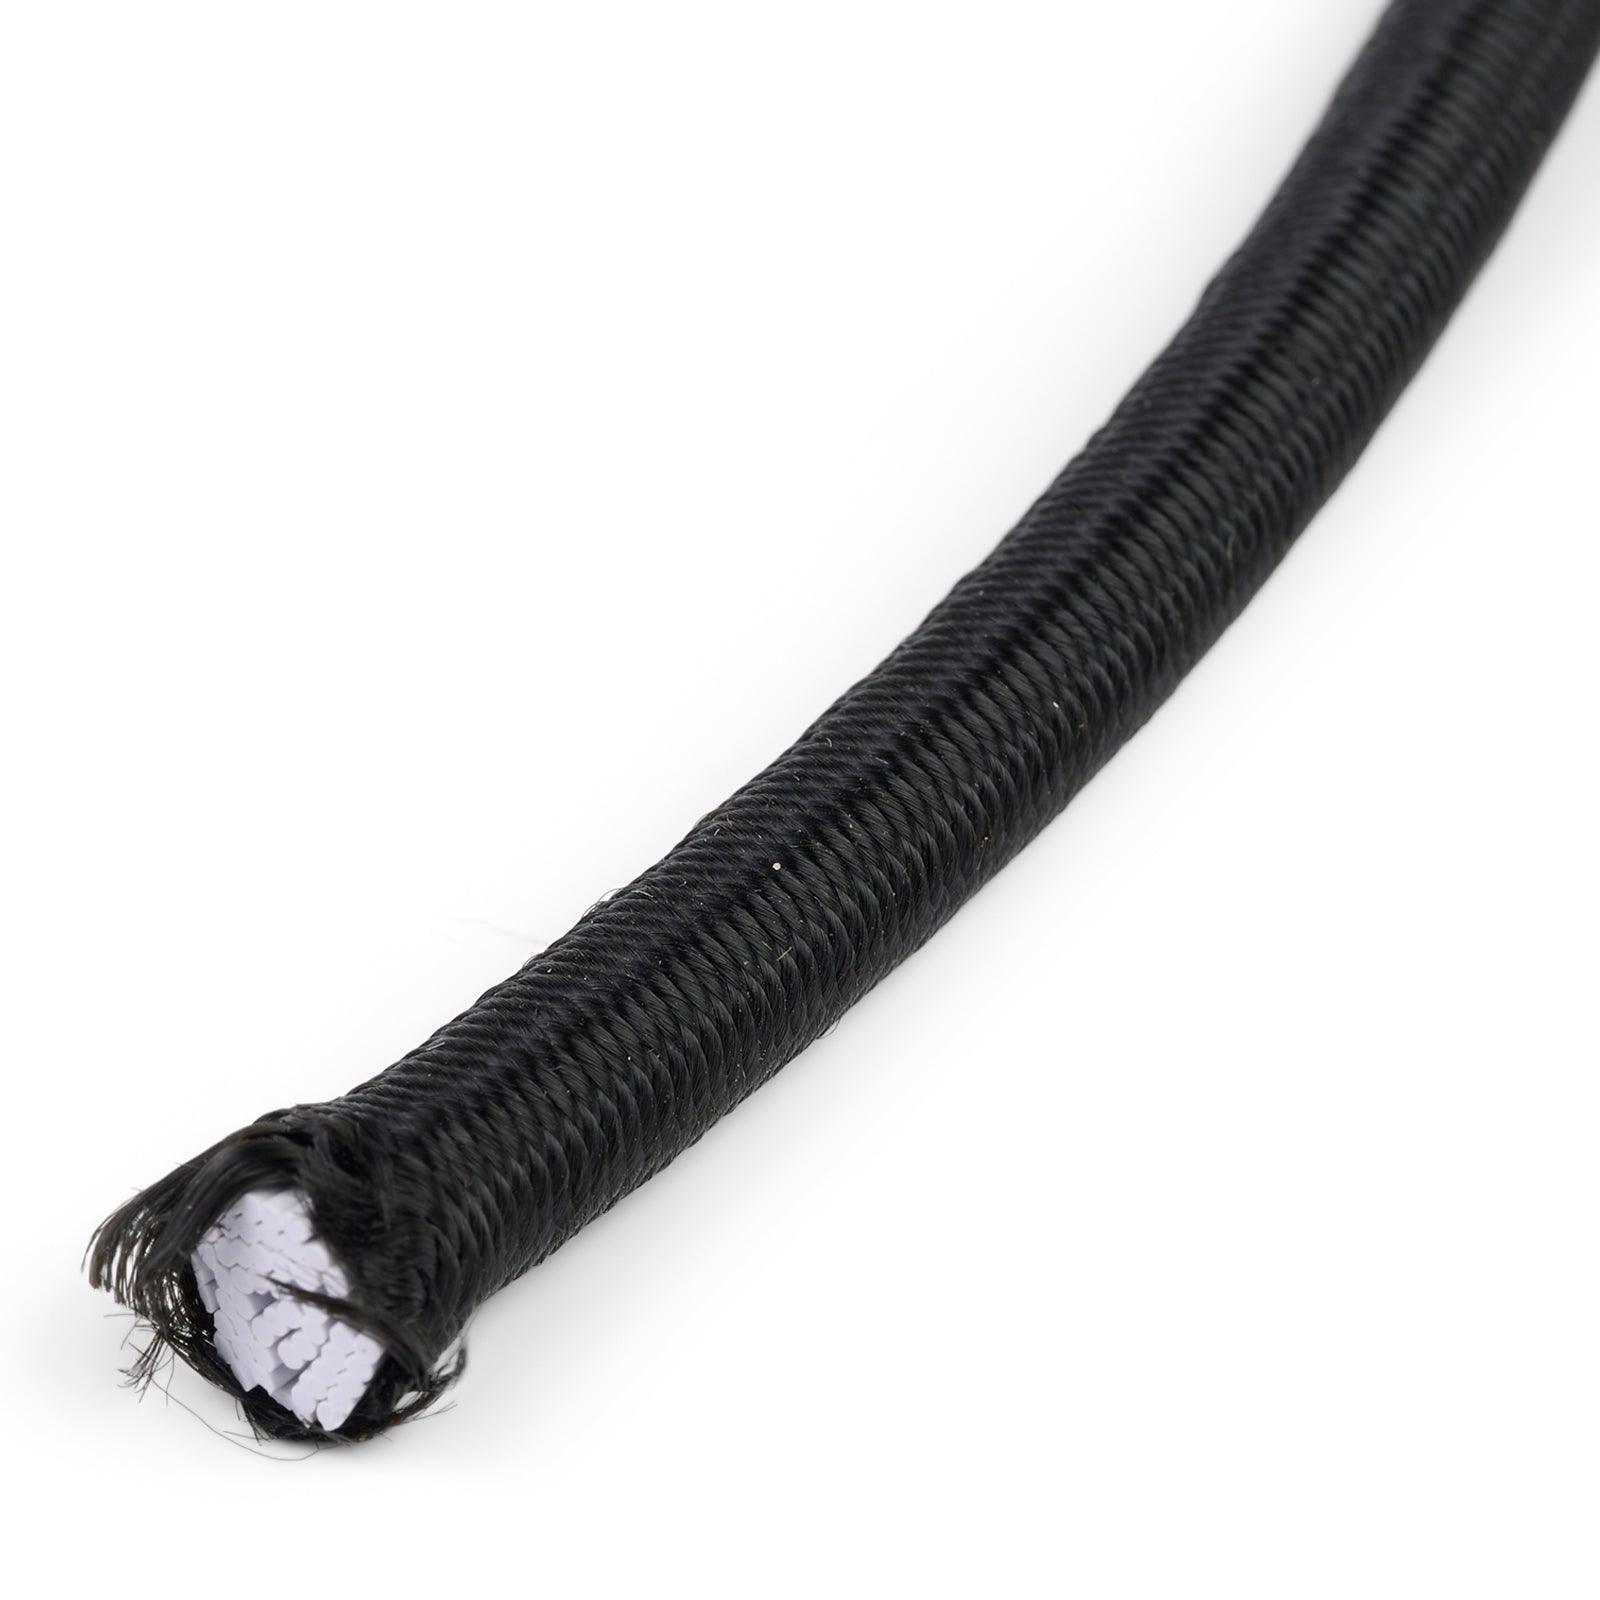 Elastic outdoor bungee cord That Are Strong and Flexible 